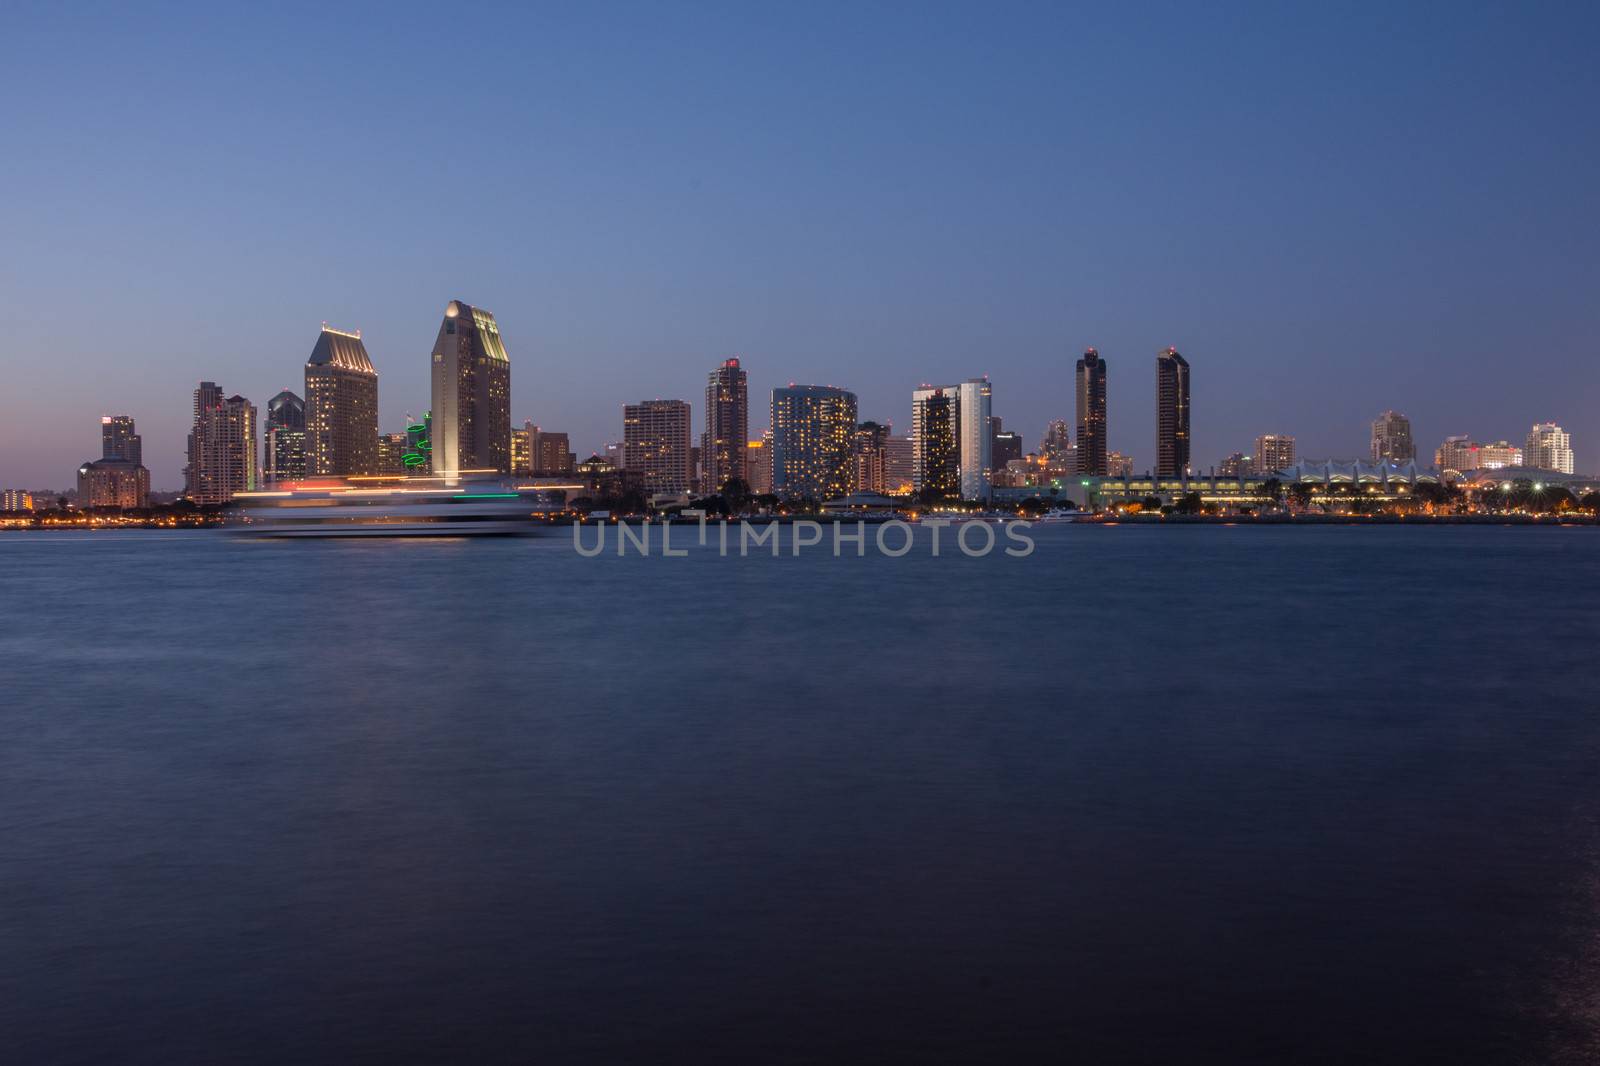 Scenic San Diego Bay and tall buildings downtown. Harbor boats with motion blur